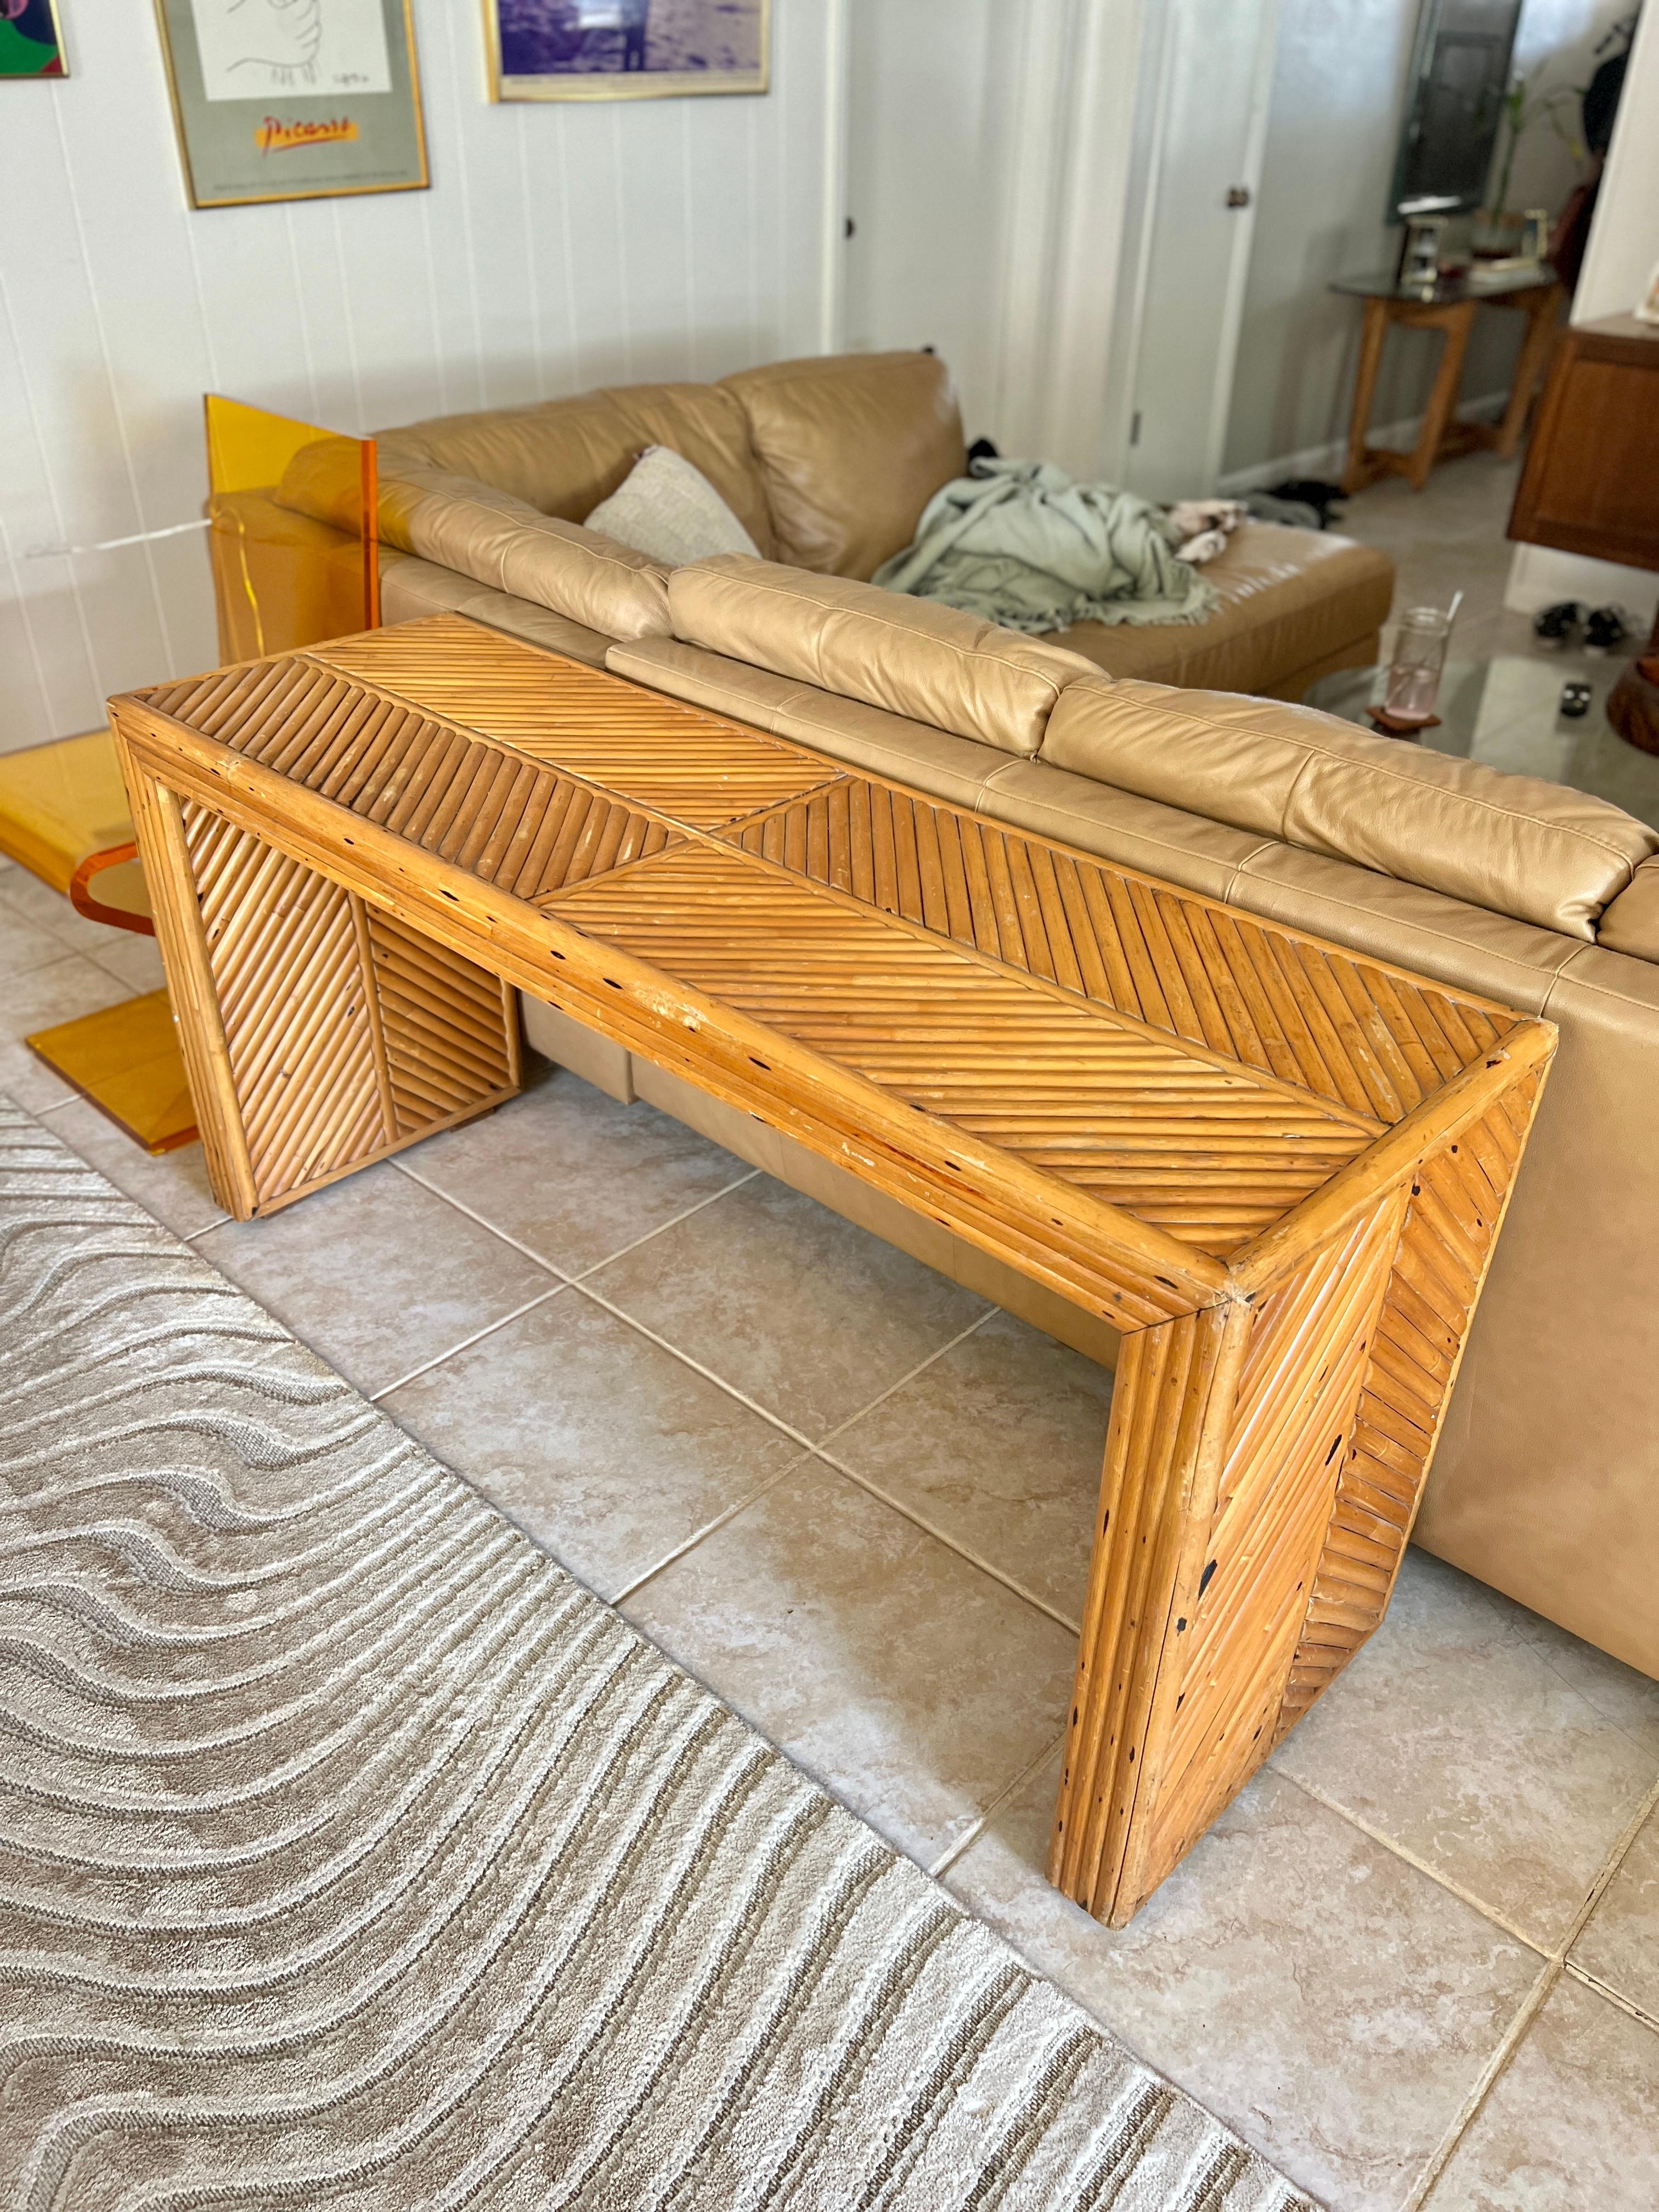 Vintage rattan sharp edged waterfall console table. With a beautiful chevron pattern on its top and sides. Circa 1970s. Can also be used as a desk. It is in good vintage condition with just one little bamboo missing on the inner right leg. Please